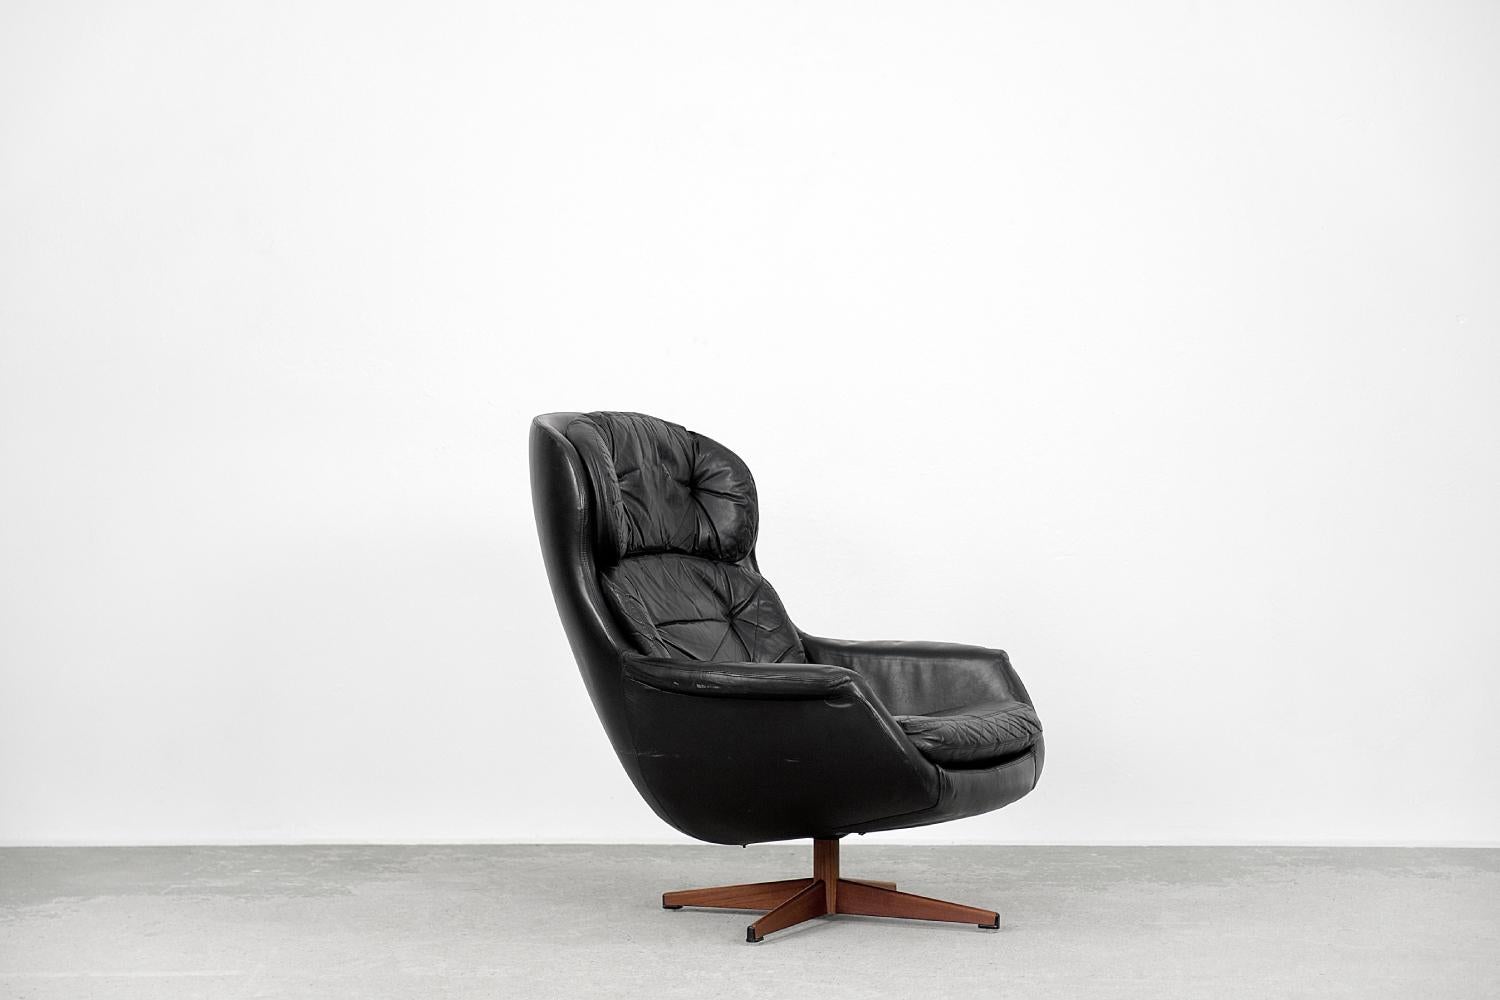 This modernist swivel armchair was manufactured by Selig Imperial in Sweden during the 1970s. The armchair is made of black natural leather. The base is a chrome star-shaped base covered with brown veneer. The back cushions are loosely attached with